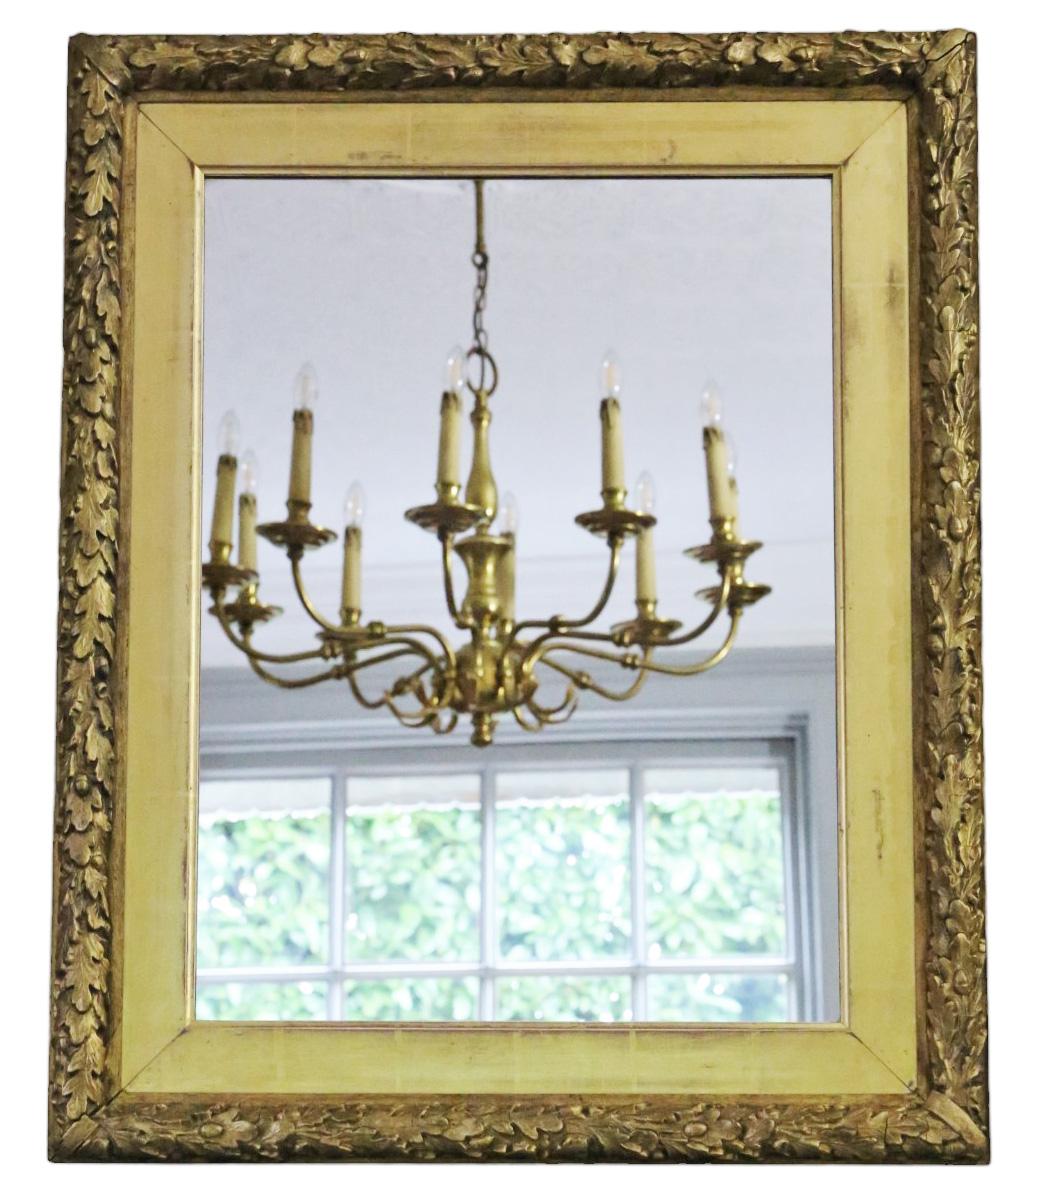 Antique 19th Century large gilt overmantle wall mirror of fine quality, adorned with a decorative oak leaf design.

This mirror captivates with its simple yet striking design, lending character to any suitable space. The frame is solid and free from